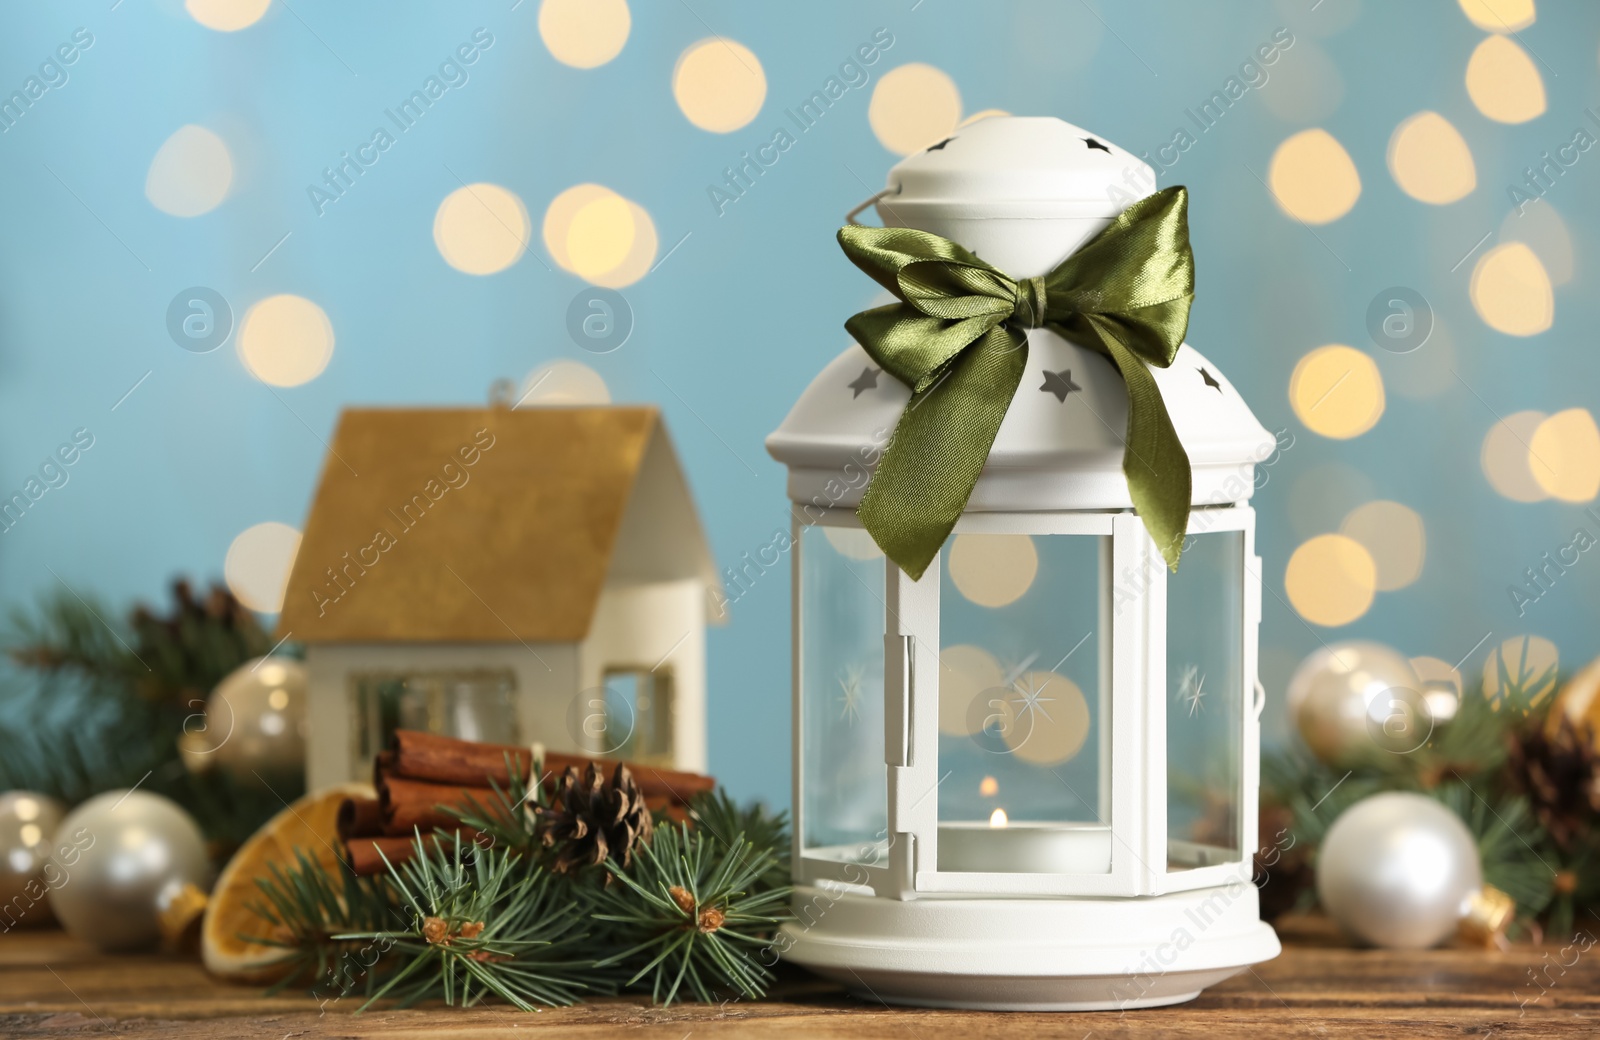 Photo of Christmas lantern with burning candle and festive decor on wooden table against blurred lights